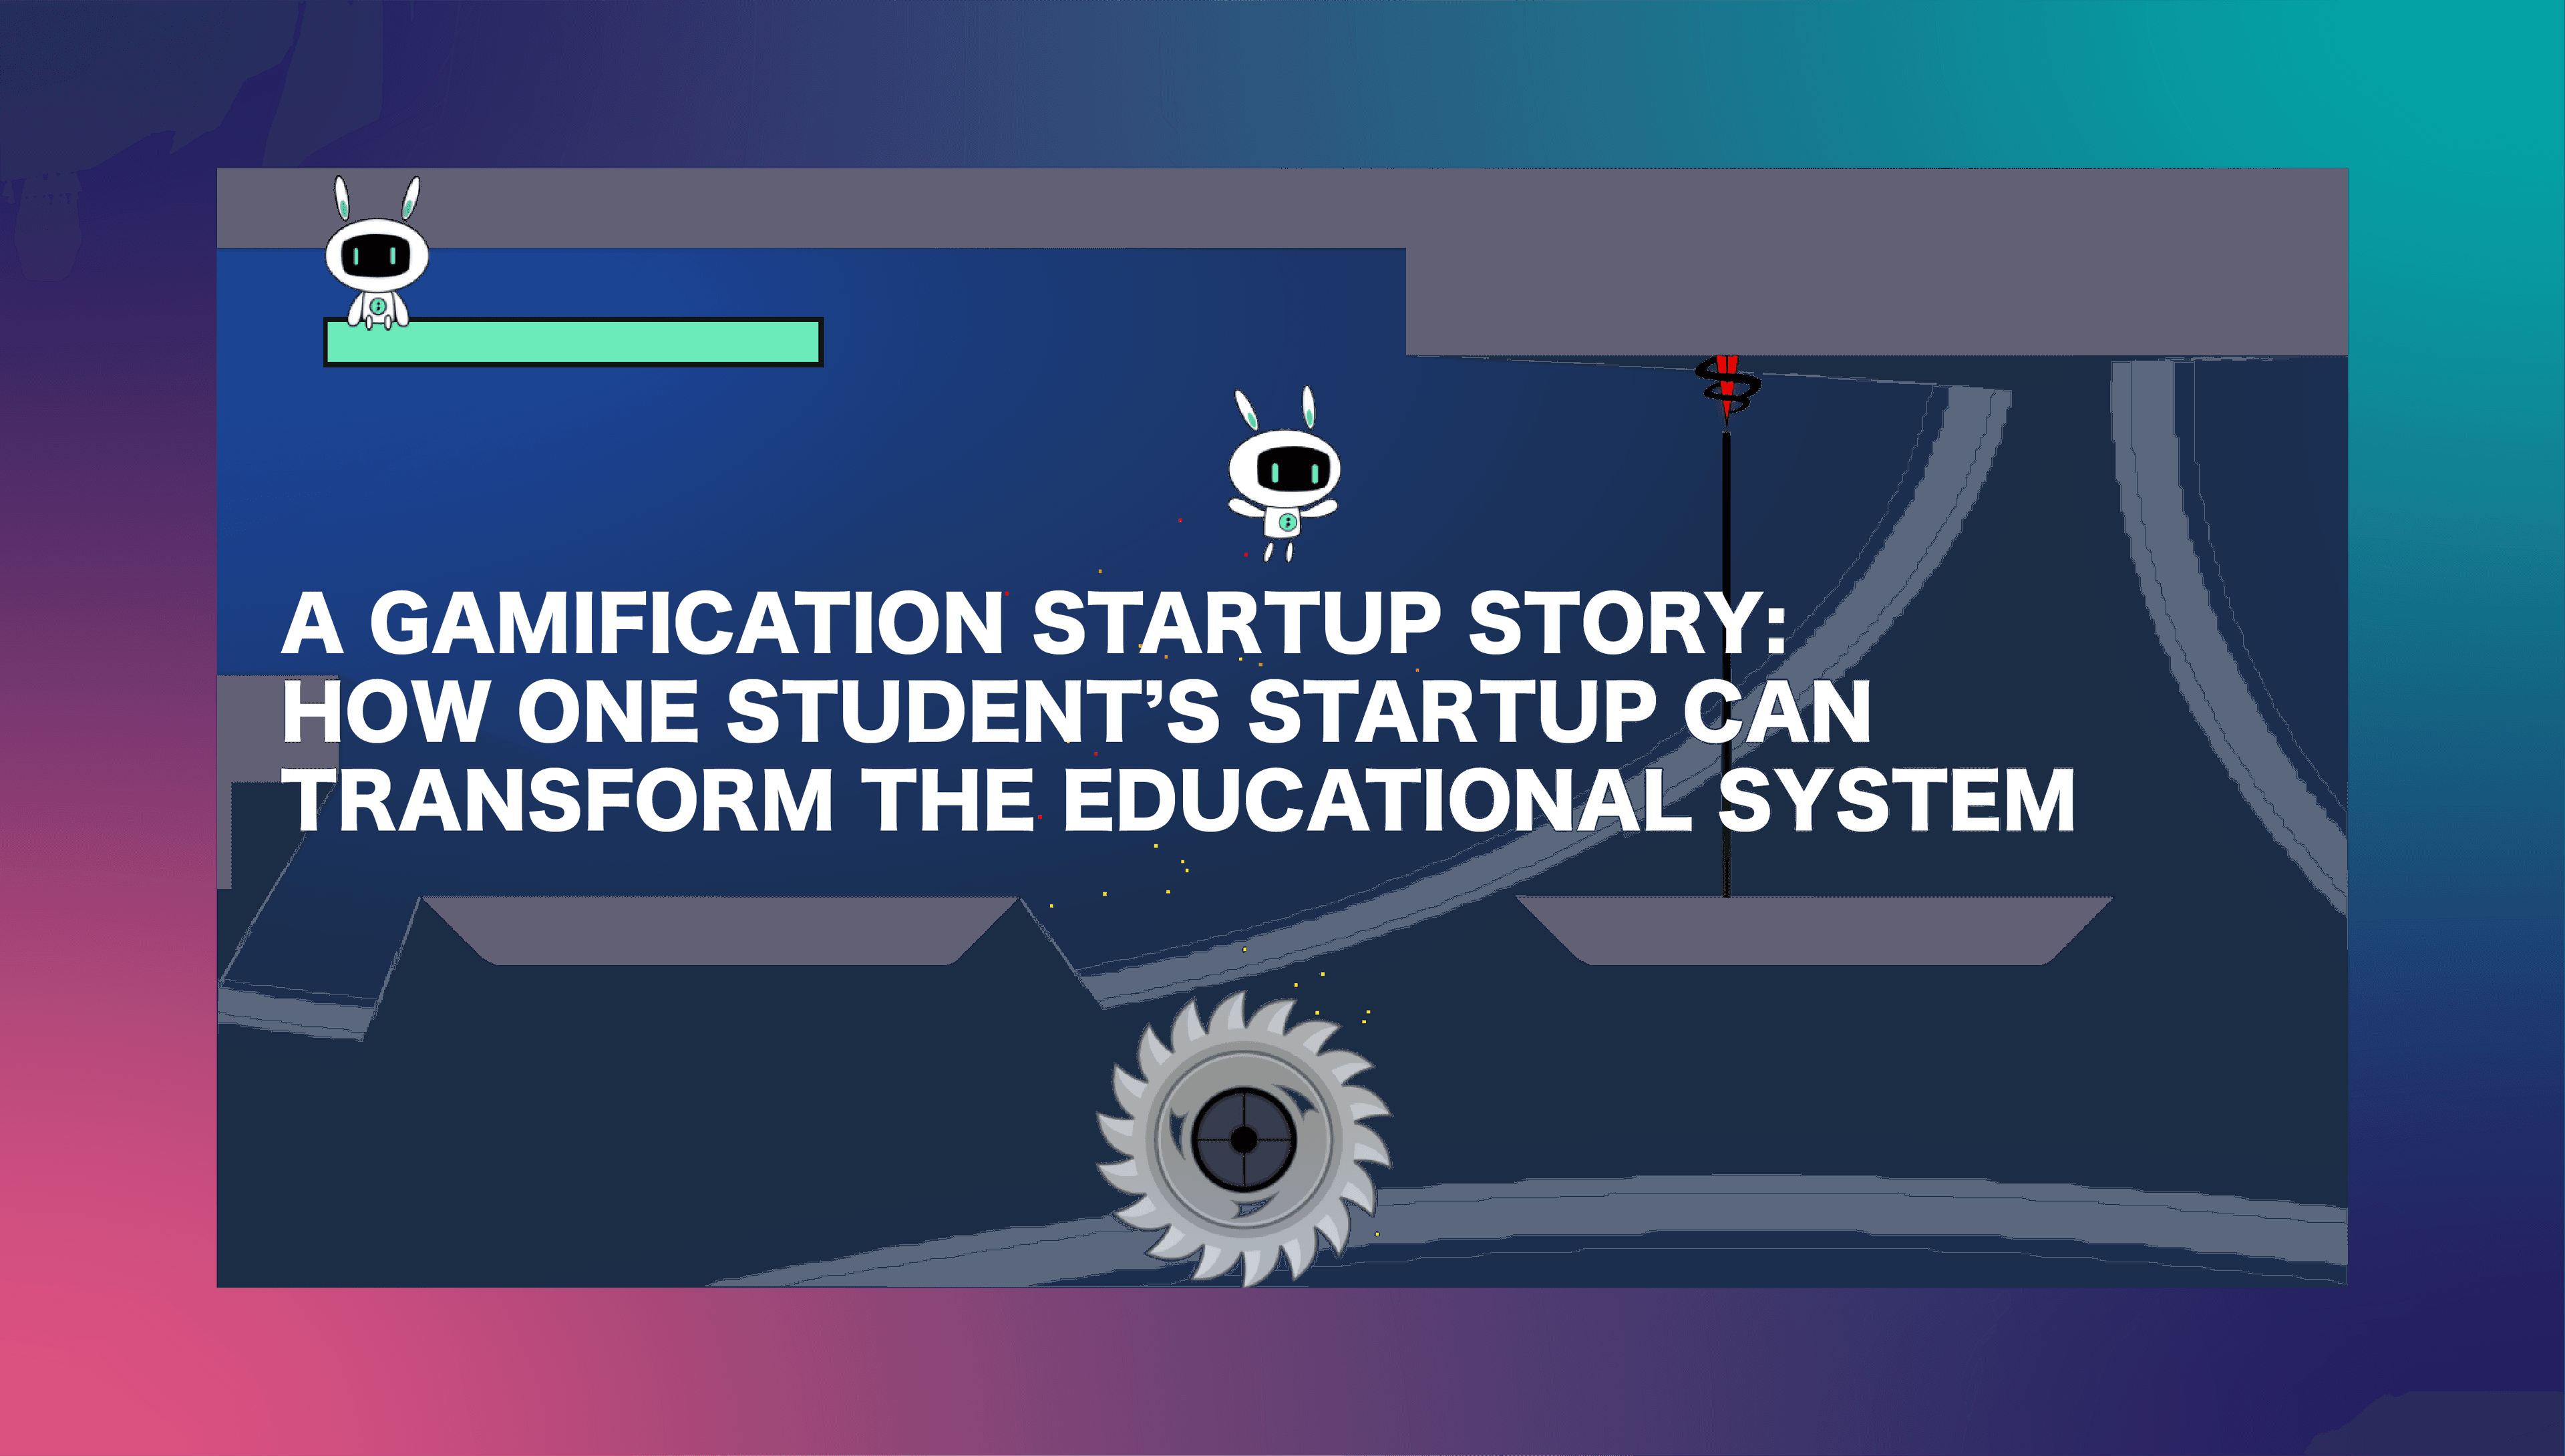 Gamification startup story how a student's startup transforms educational system